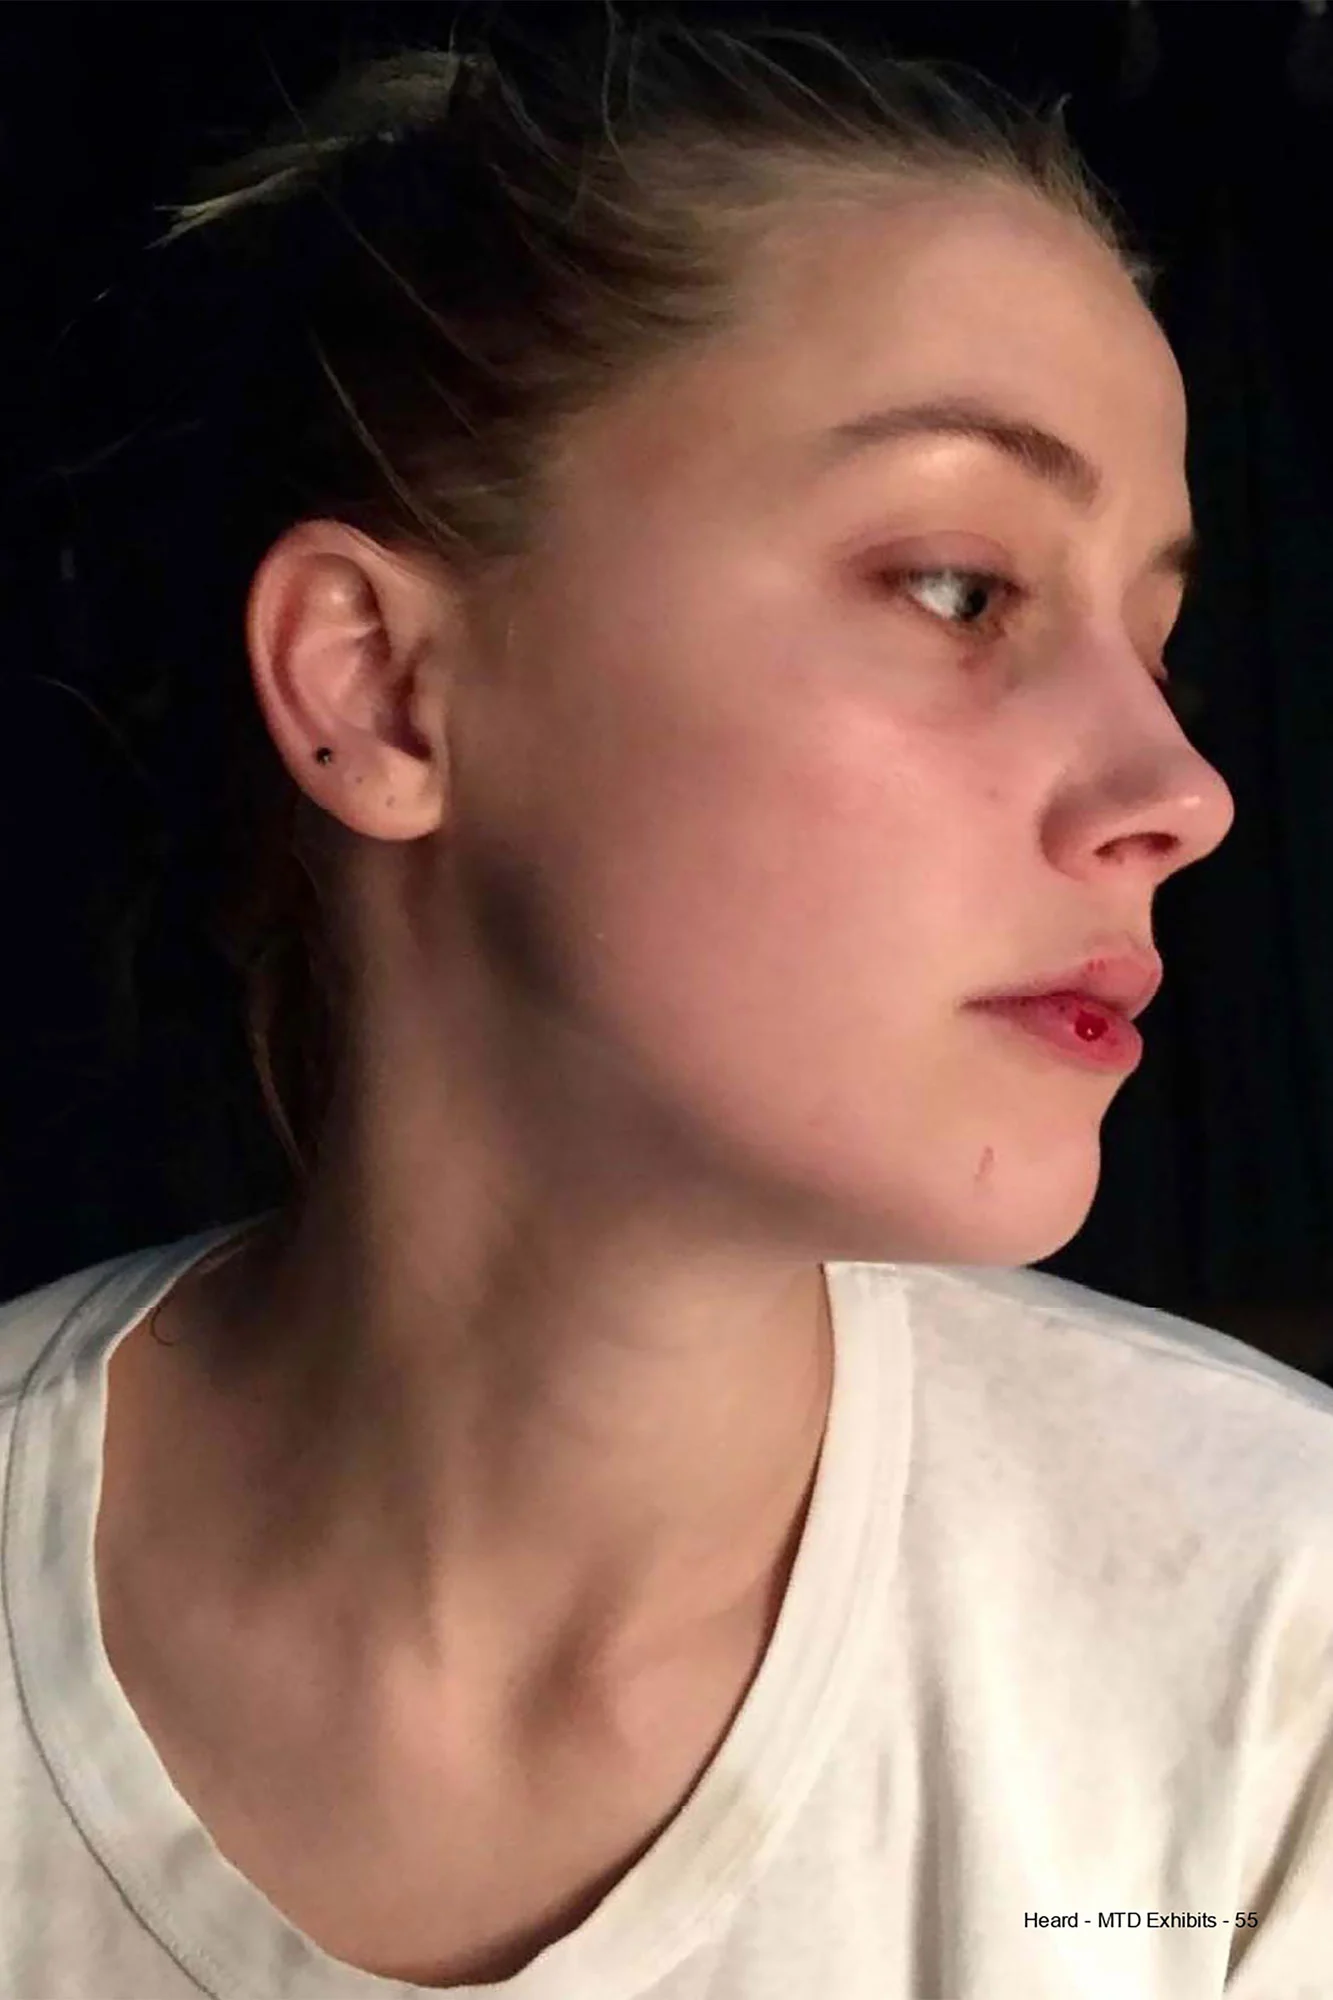 Amber heard's face injuries, photo presented during Amber Heard Johnny Depp trial